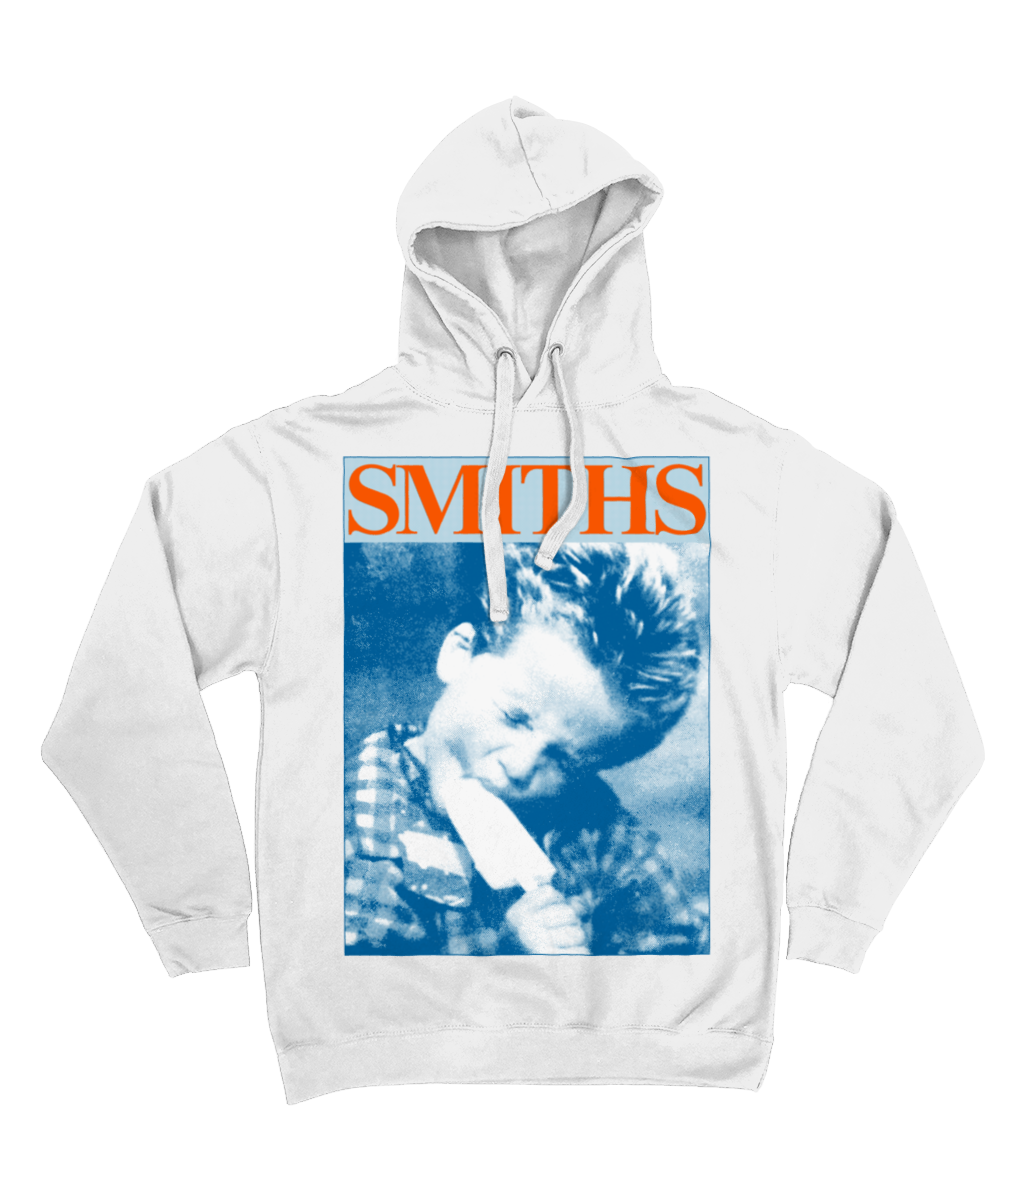 THE SMITHS - 'Boy With Lolly' - 1986 - Blue & Red - Hoodie